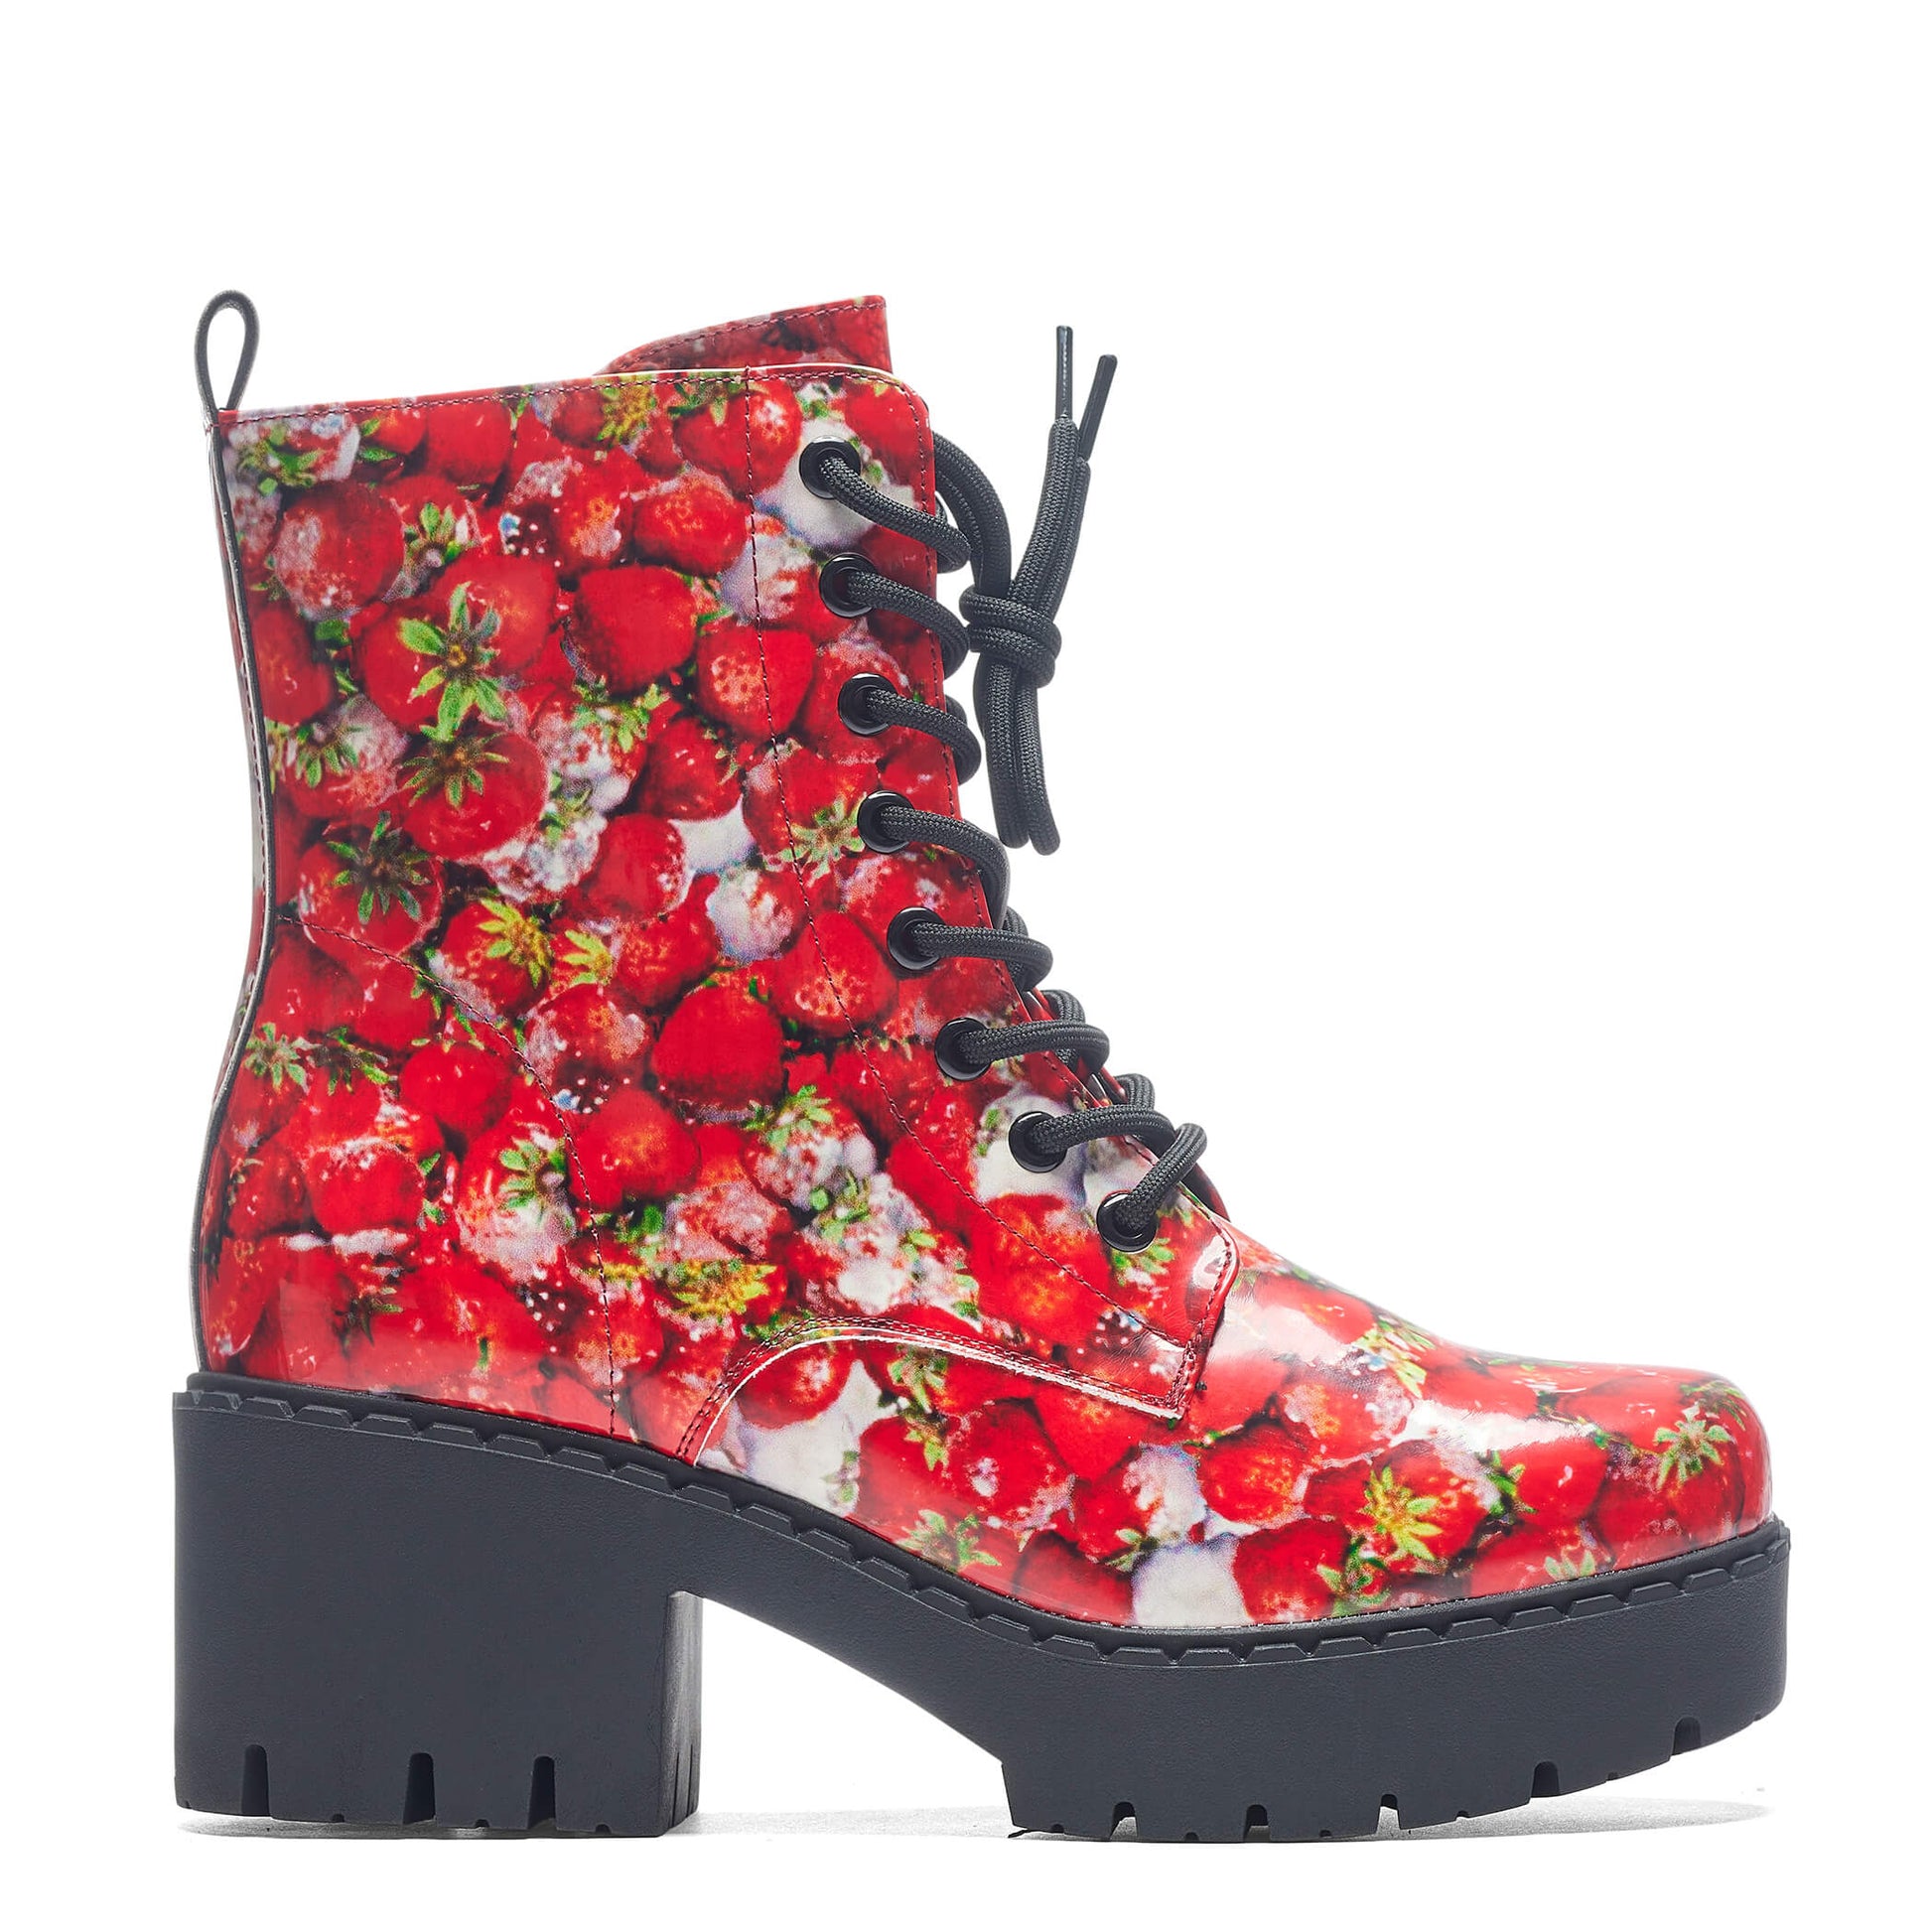 Frozen Strawberries Switch Boots - Ankle Boots - KOI Footwear - Red - Side View